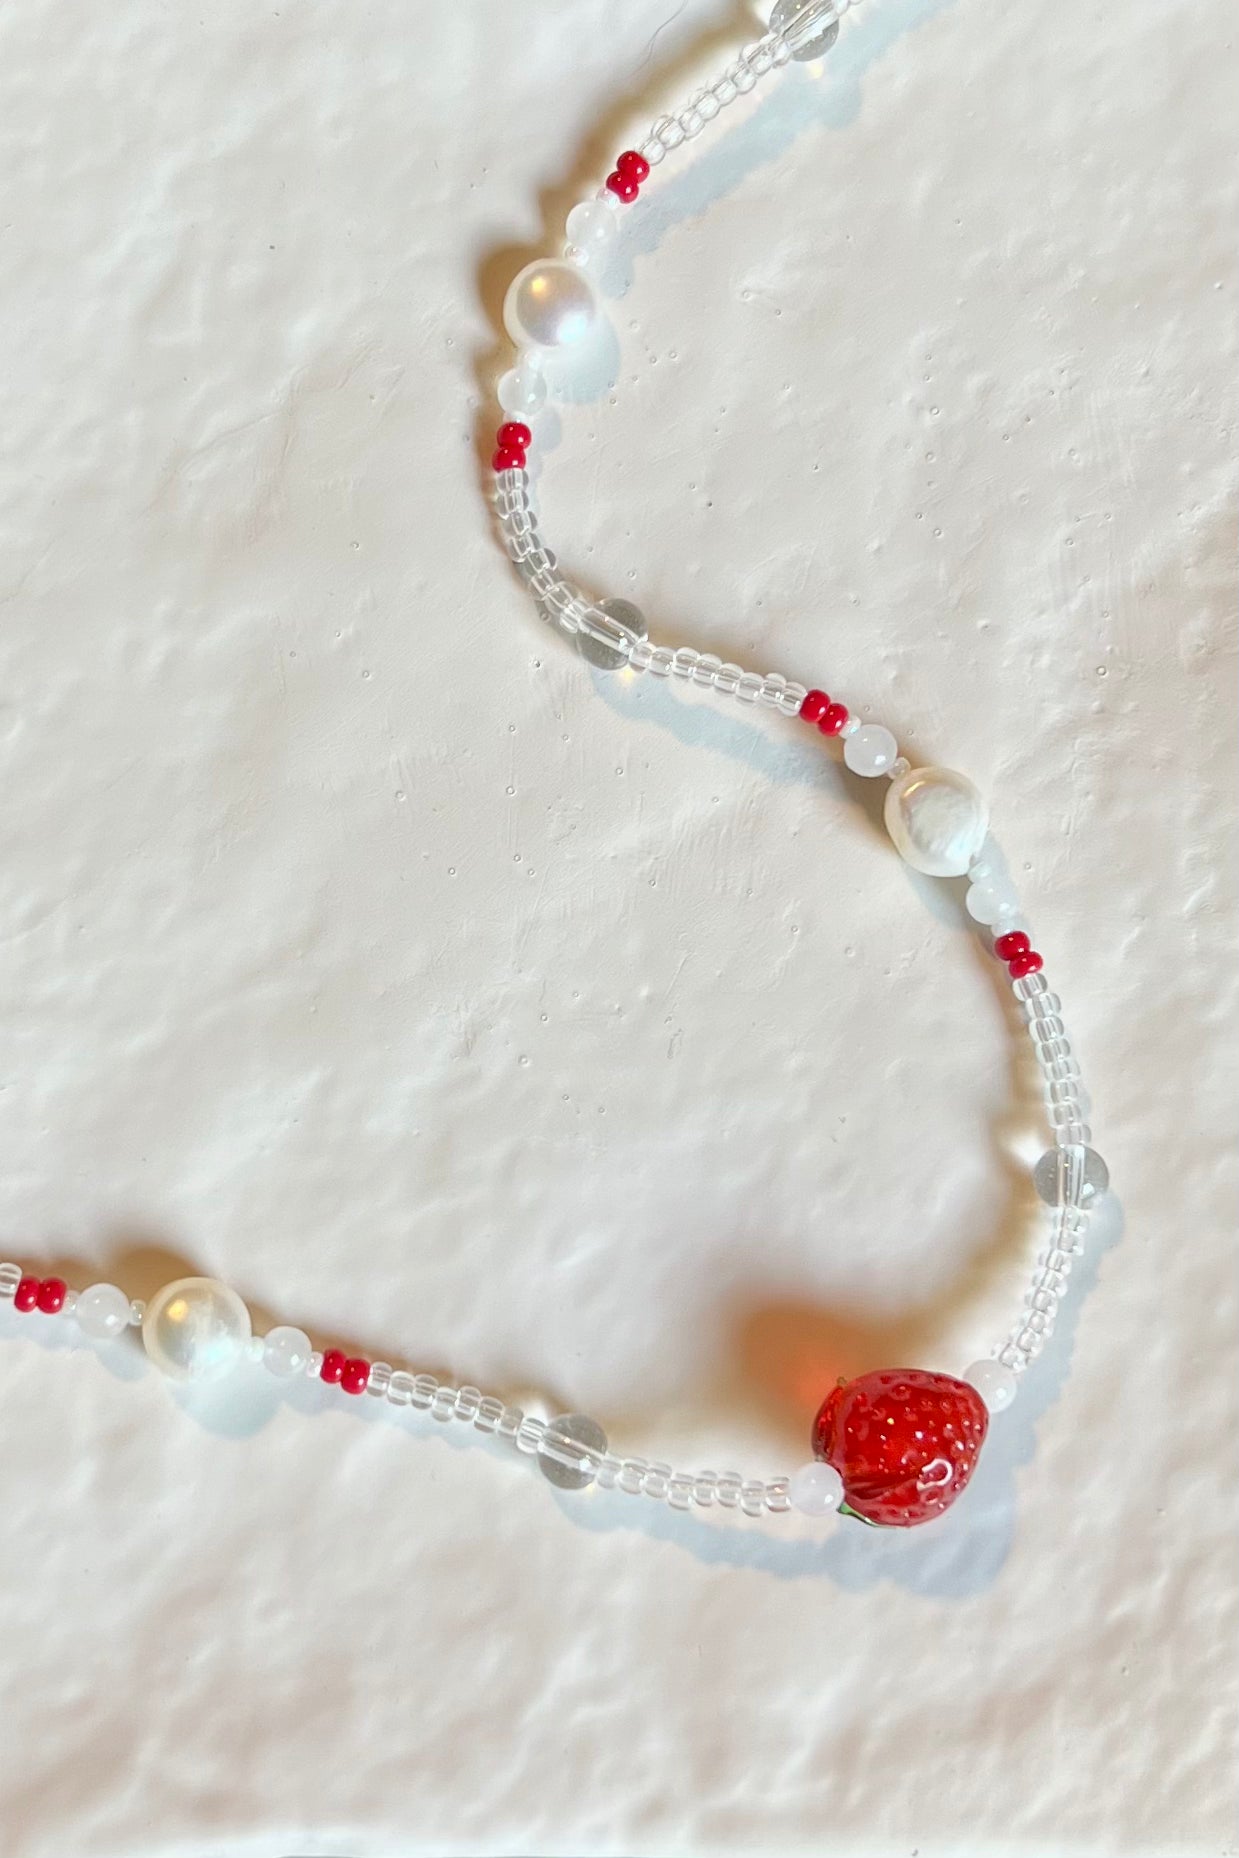 A closeup photo of the strawberry necklace placed on top of a texture white ceramic plate.